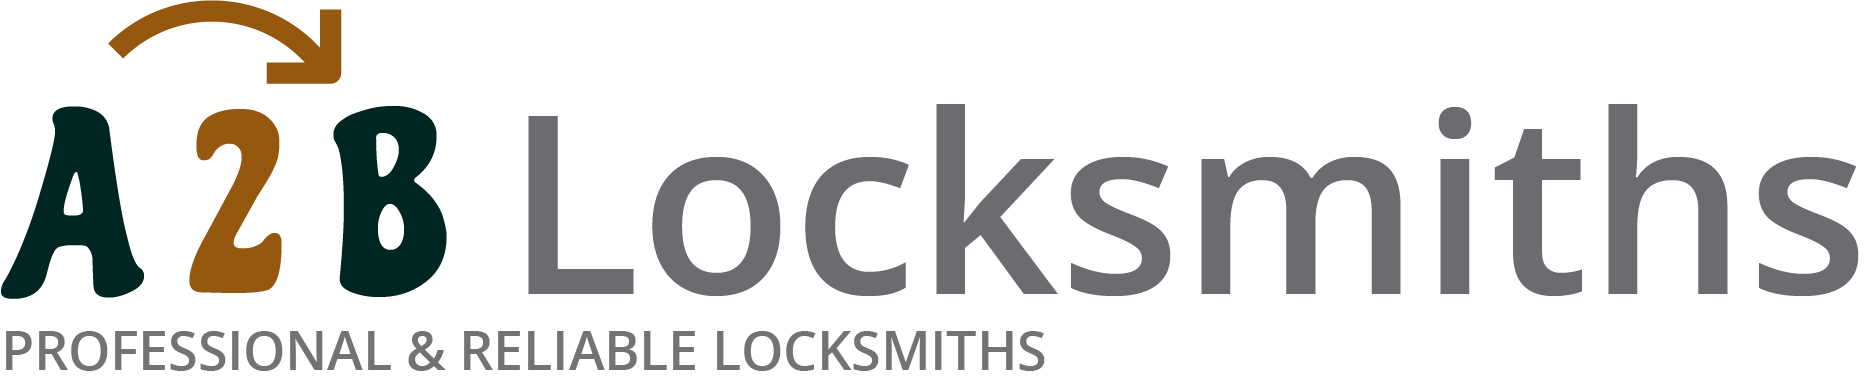 If you are locked out of house in Kings Lynn, our 24/7 local emergency locksmith services can help you.